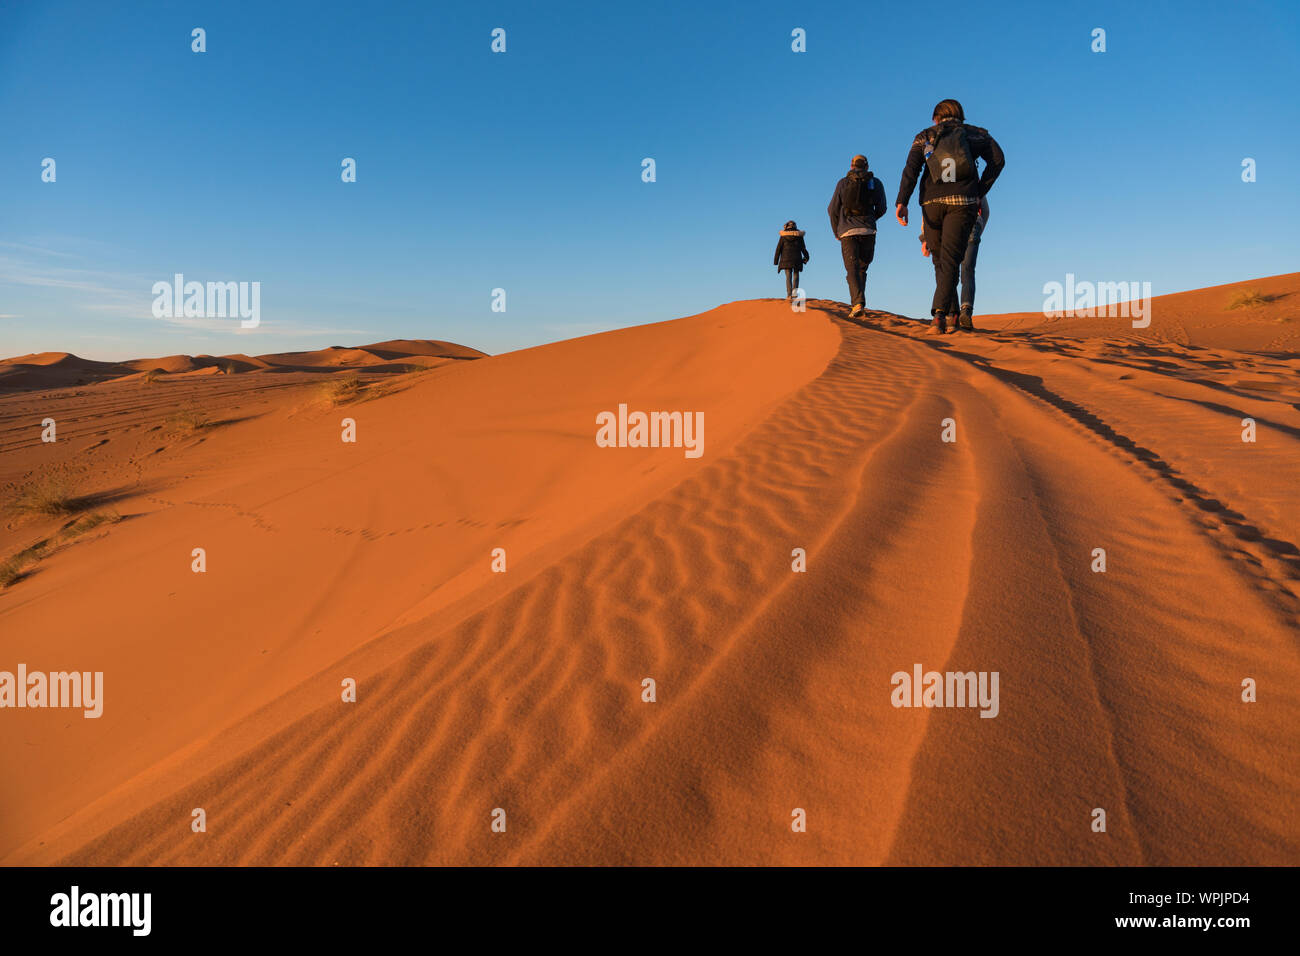 Three hikers are goiong up on the sand Dune in Erg Chebbi desert, Morocco Stock Photo